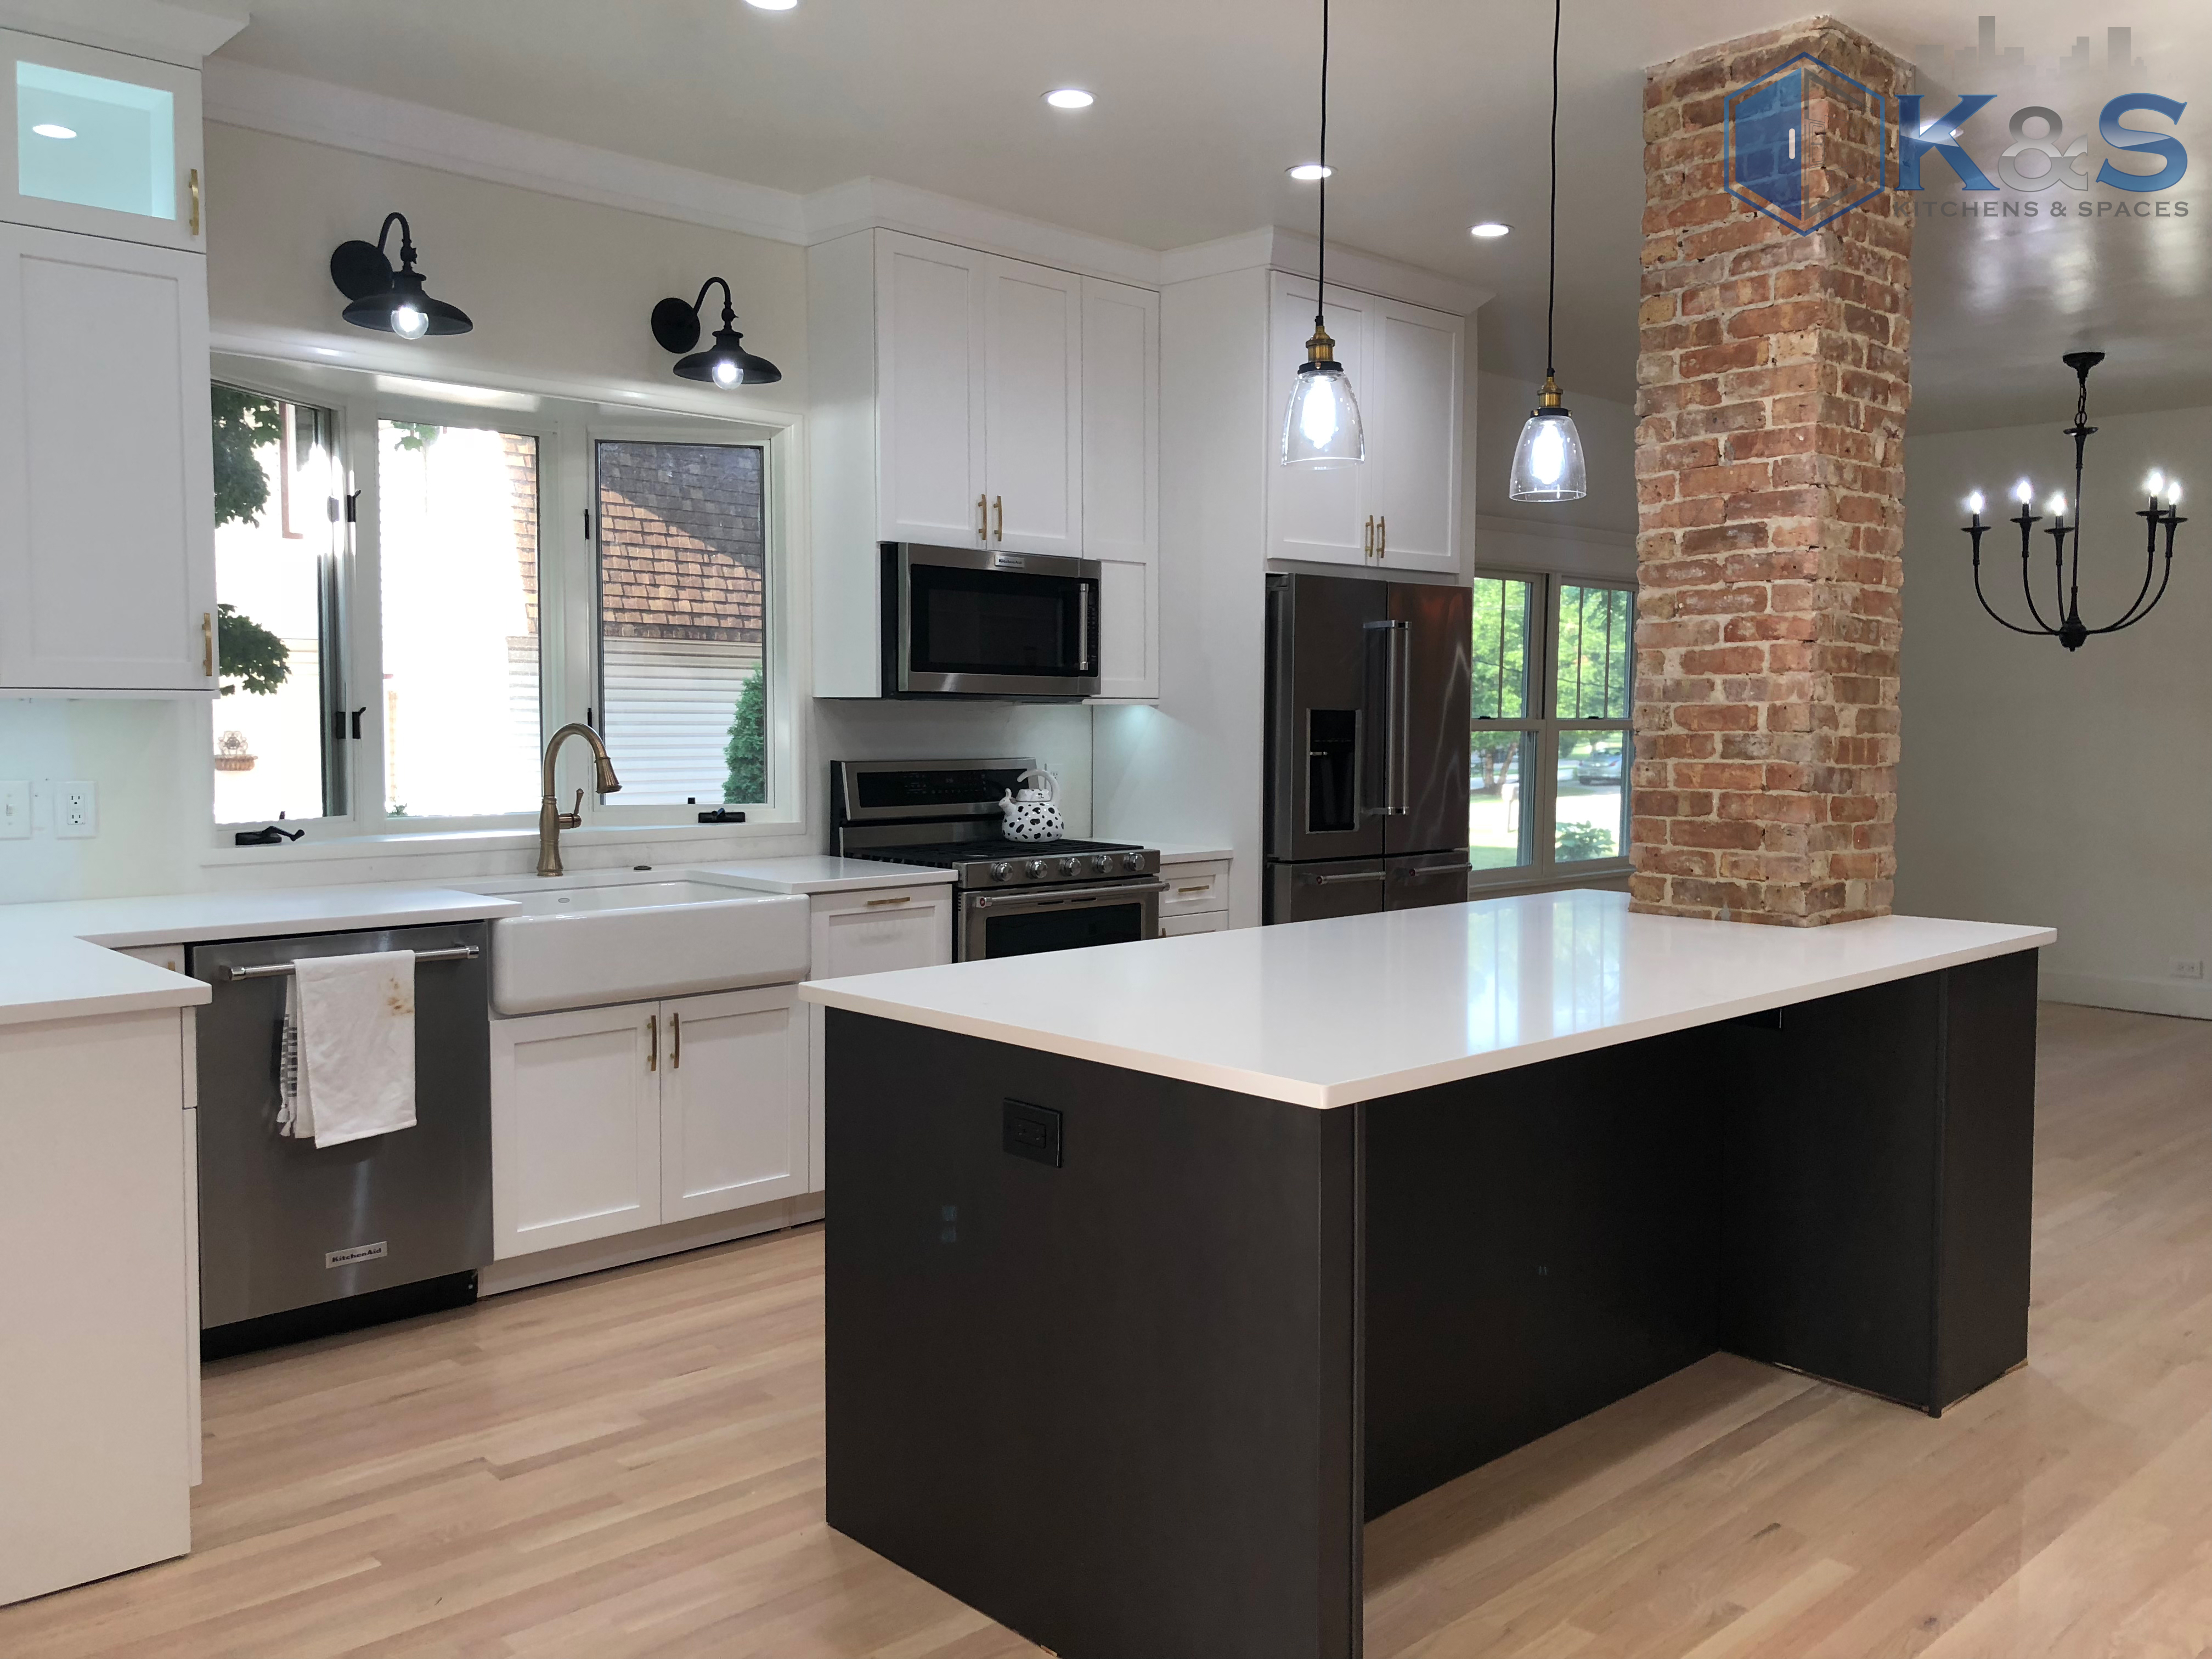 Kitchen Remodeling: Revitalize Your Space with a Vibrant Kitchen Renovation thumbnail